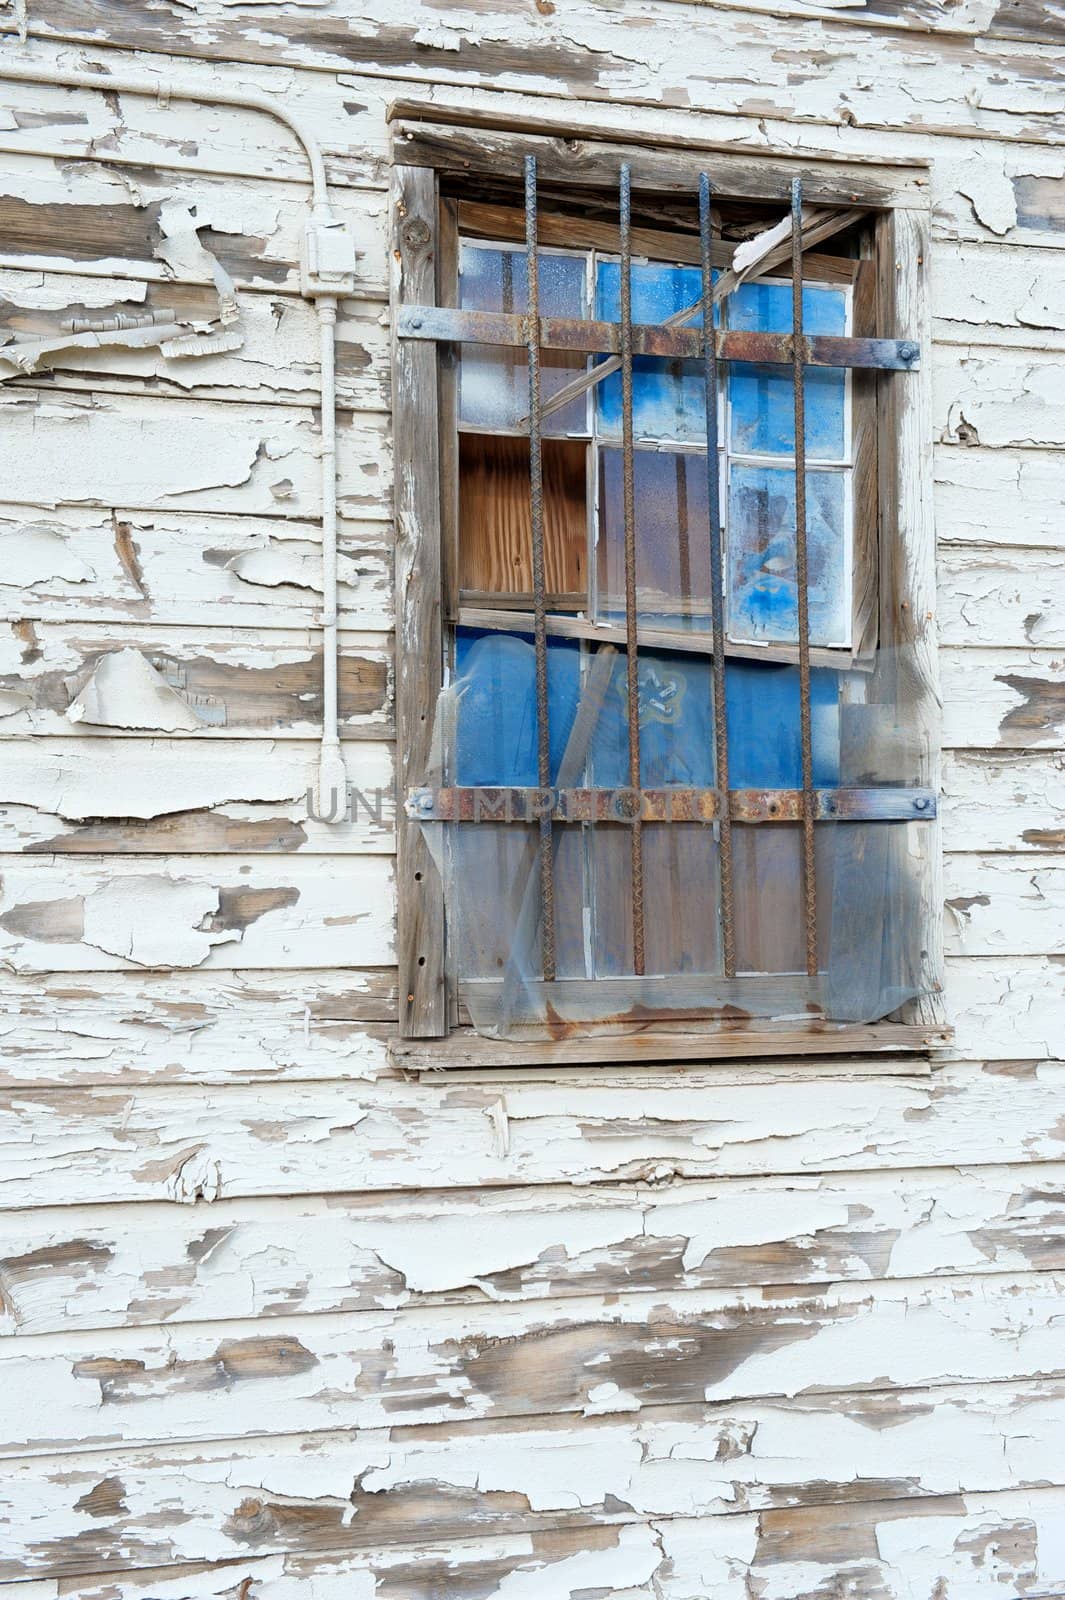 A boarded up window with broken blue panes of glass that has bars on it